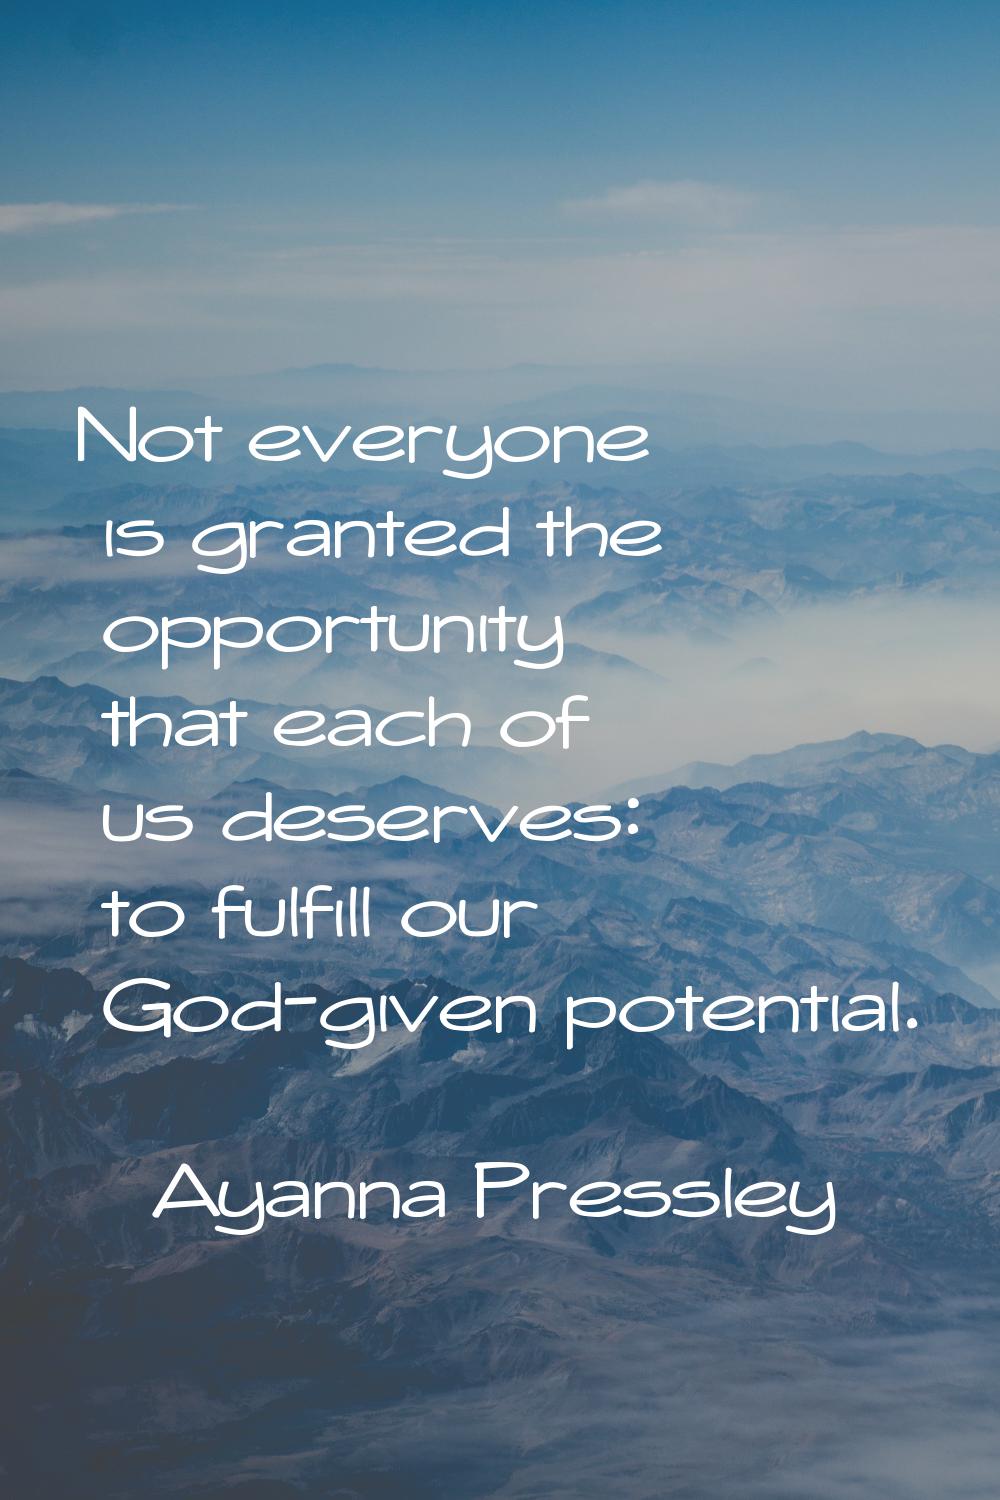 Not everyone is granted the opportunity that each of us deserves: to fulfill our God-given potentia